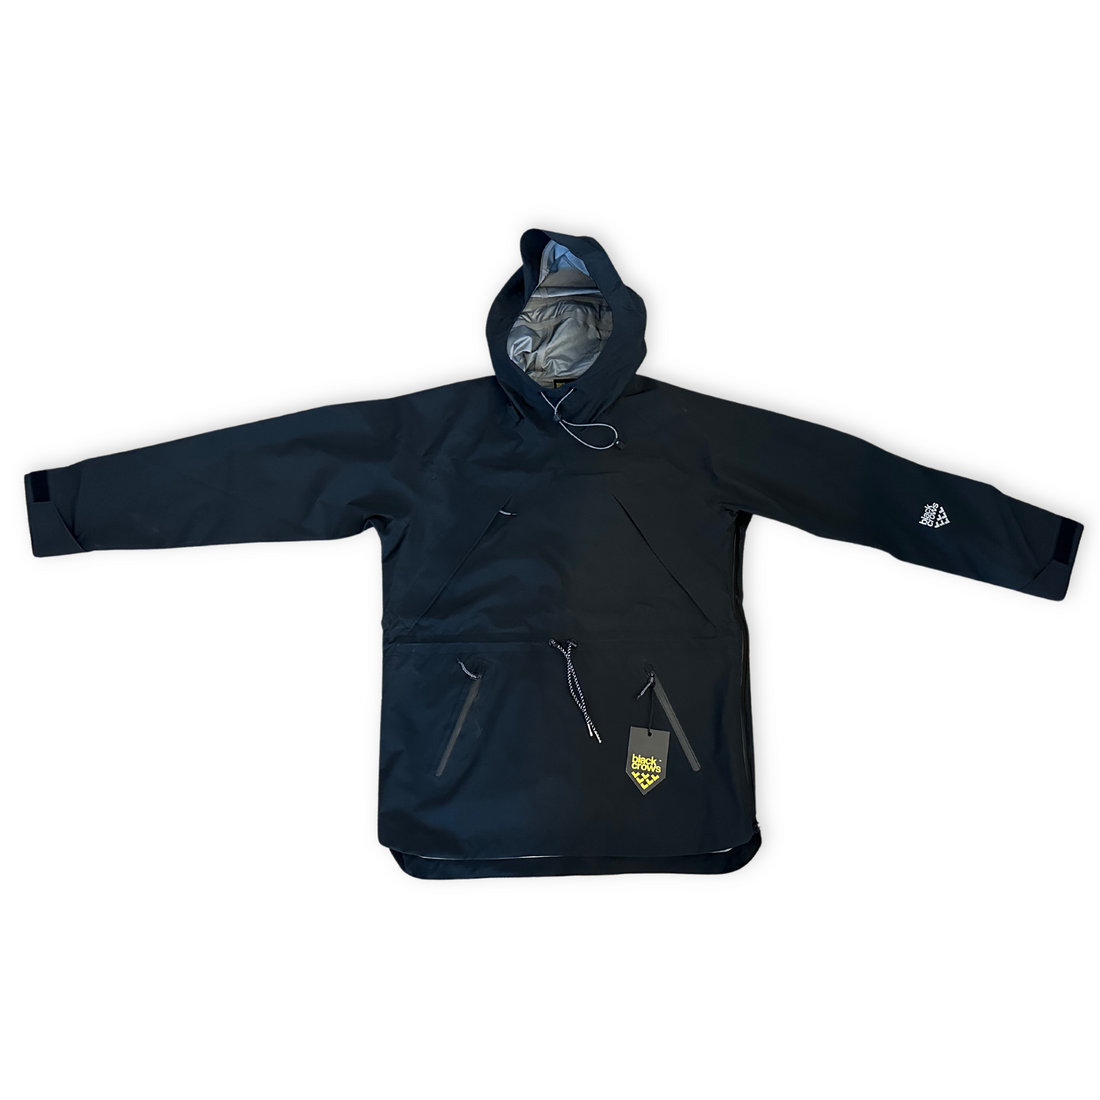 Available to Ship – Ragged Mountain Sports